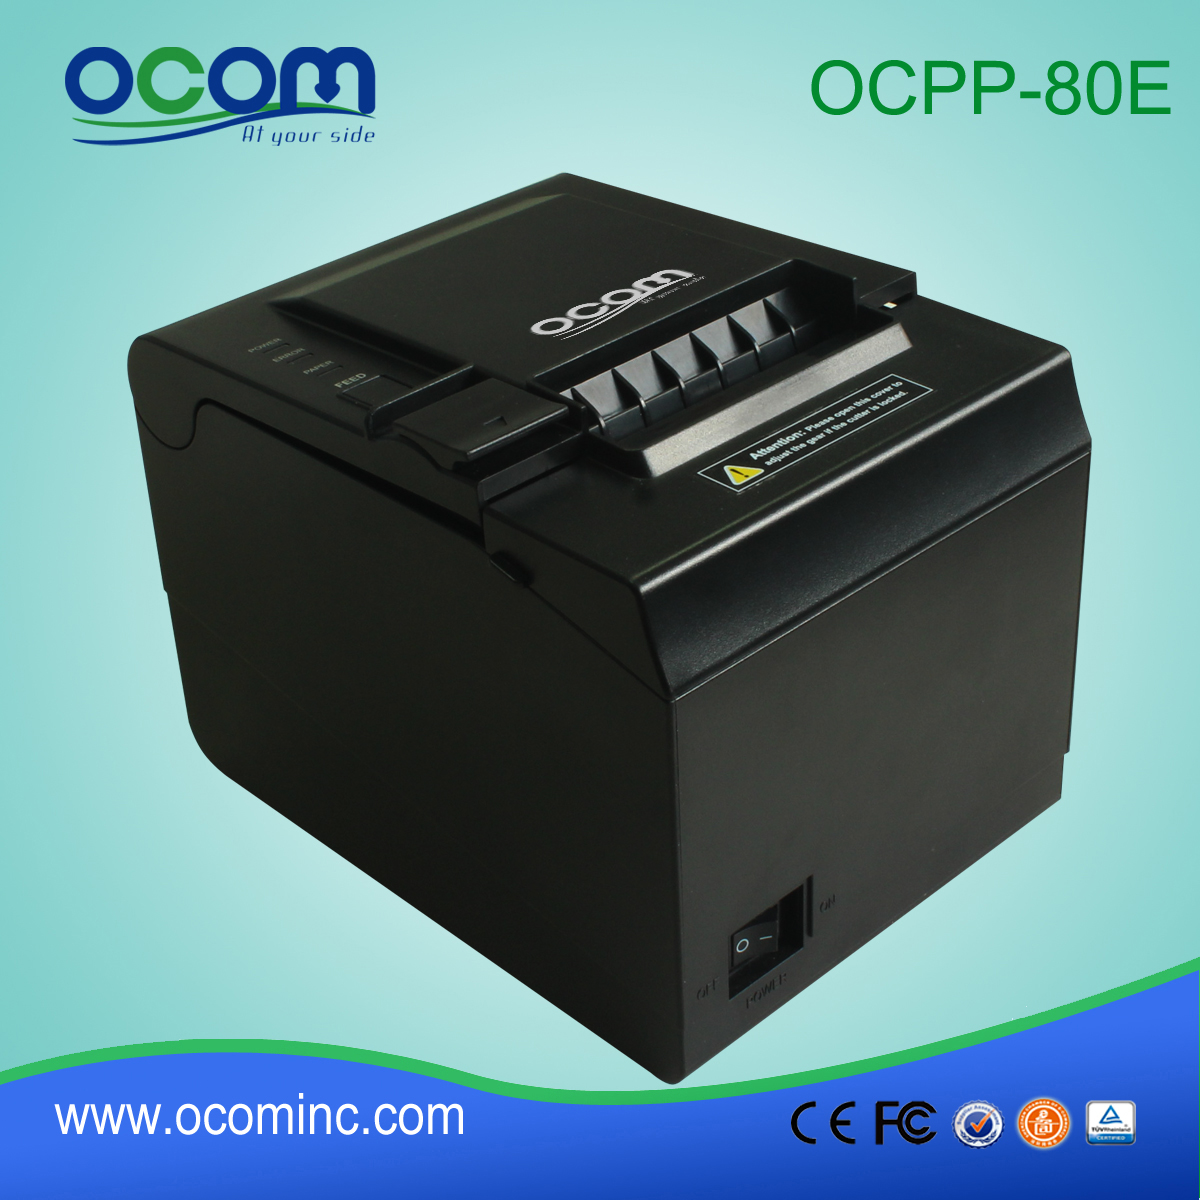 OCPP-80E --- China facory gemaakt low cost thermische printer